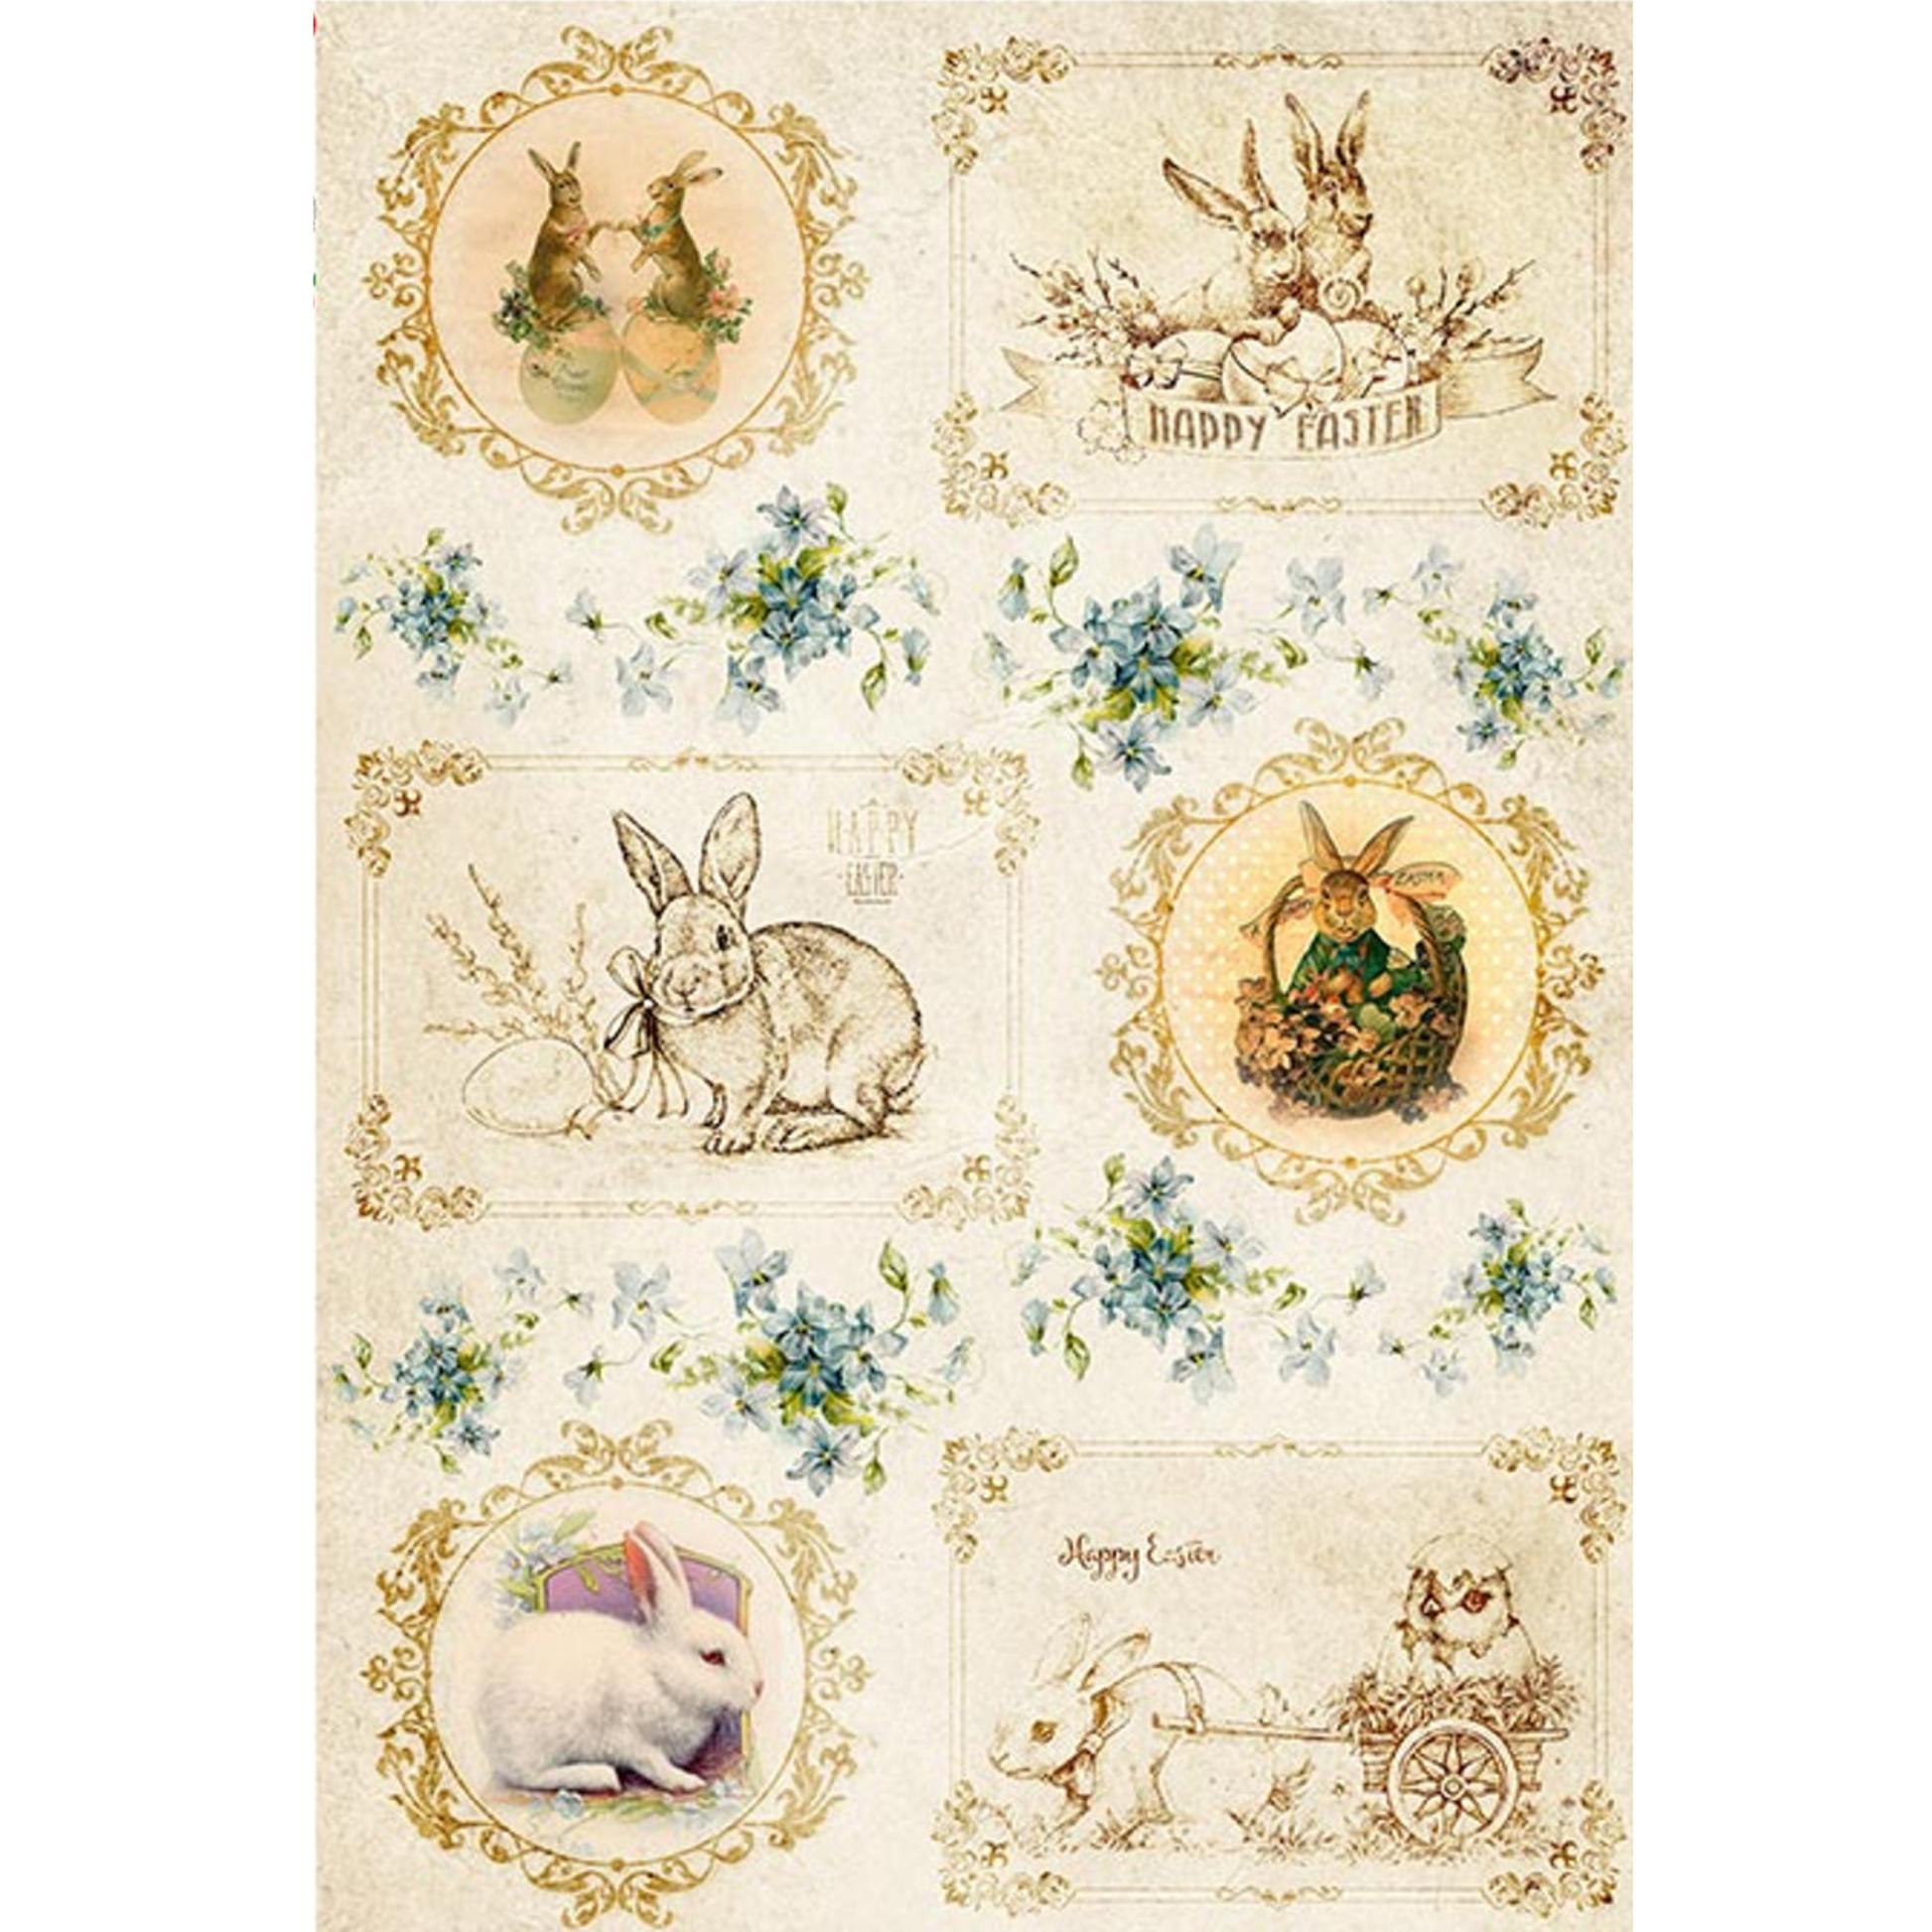 "Easter Bunnies" Holiday 0100 - decoupage rice paper by Paper Designs. Size A4 available at Milton's Daughter.